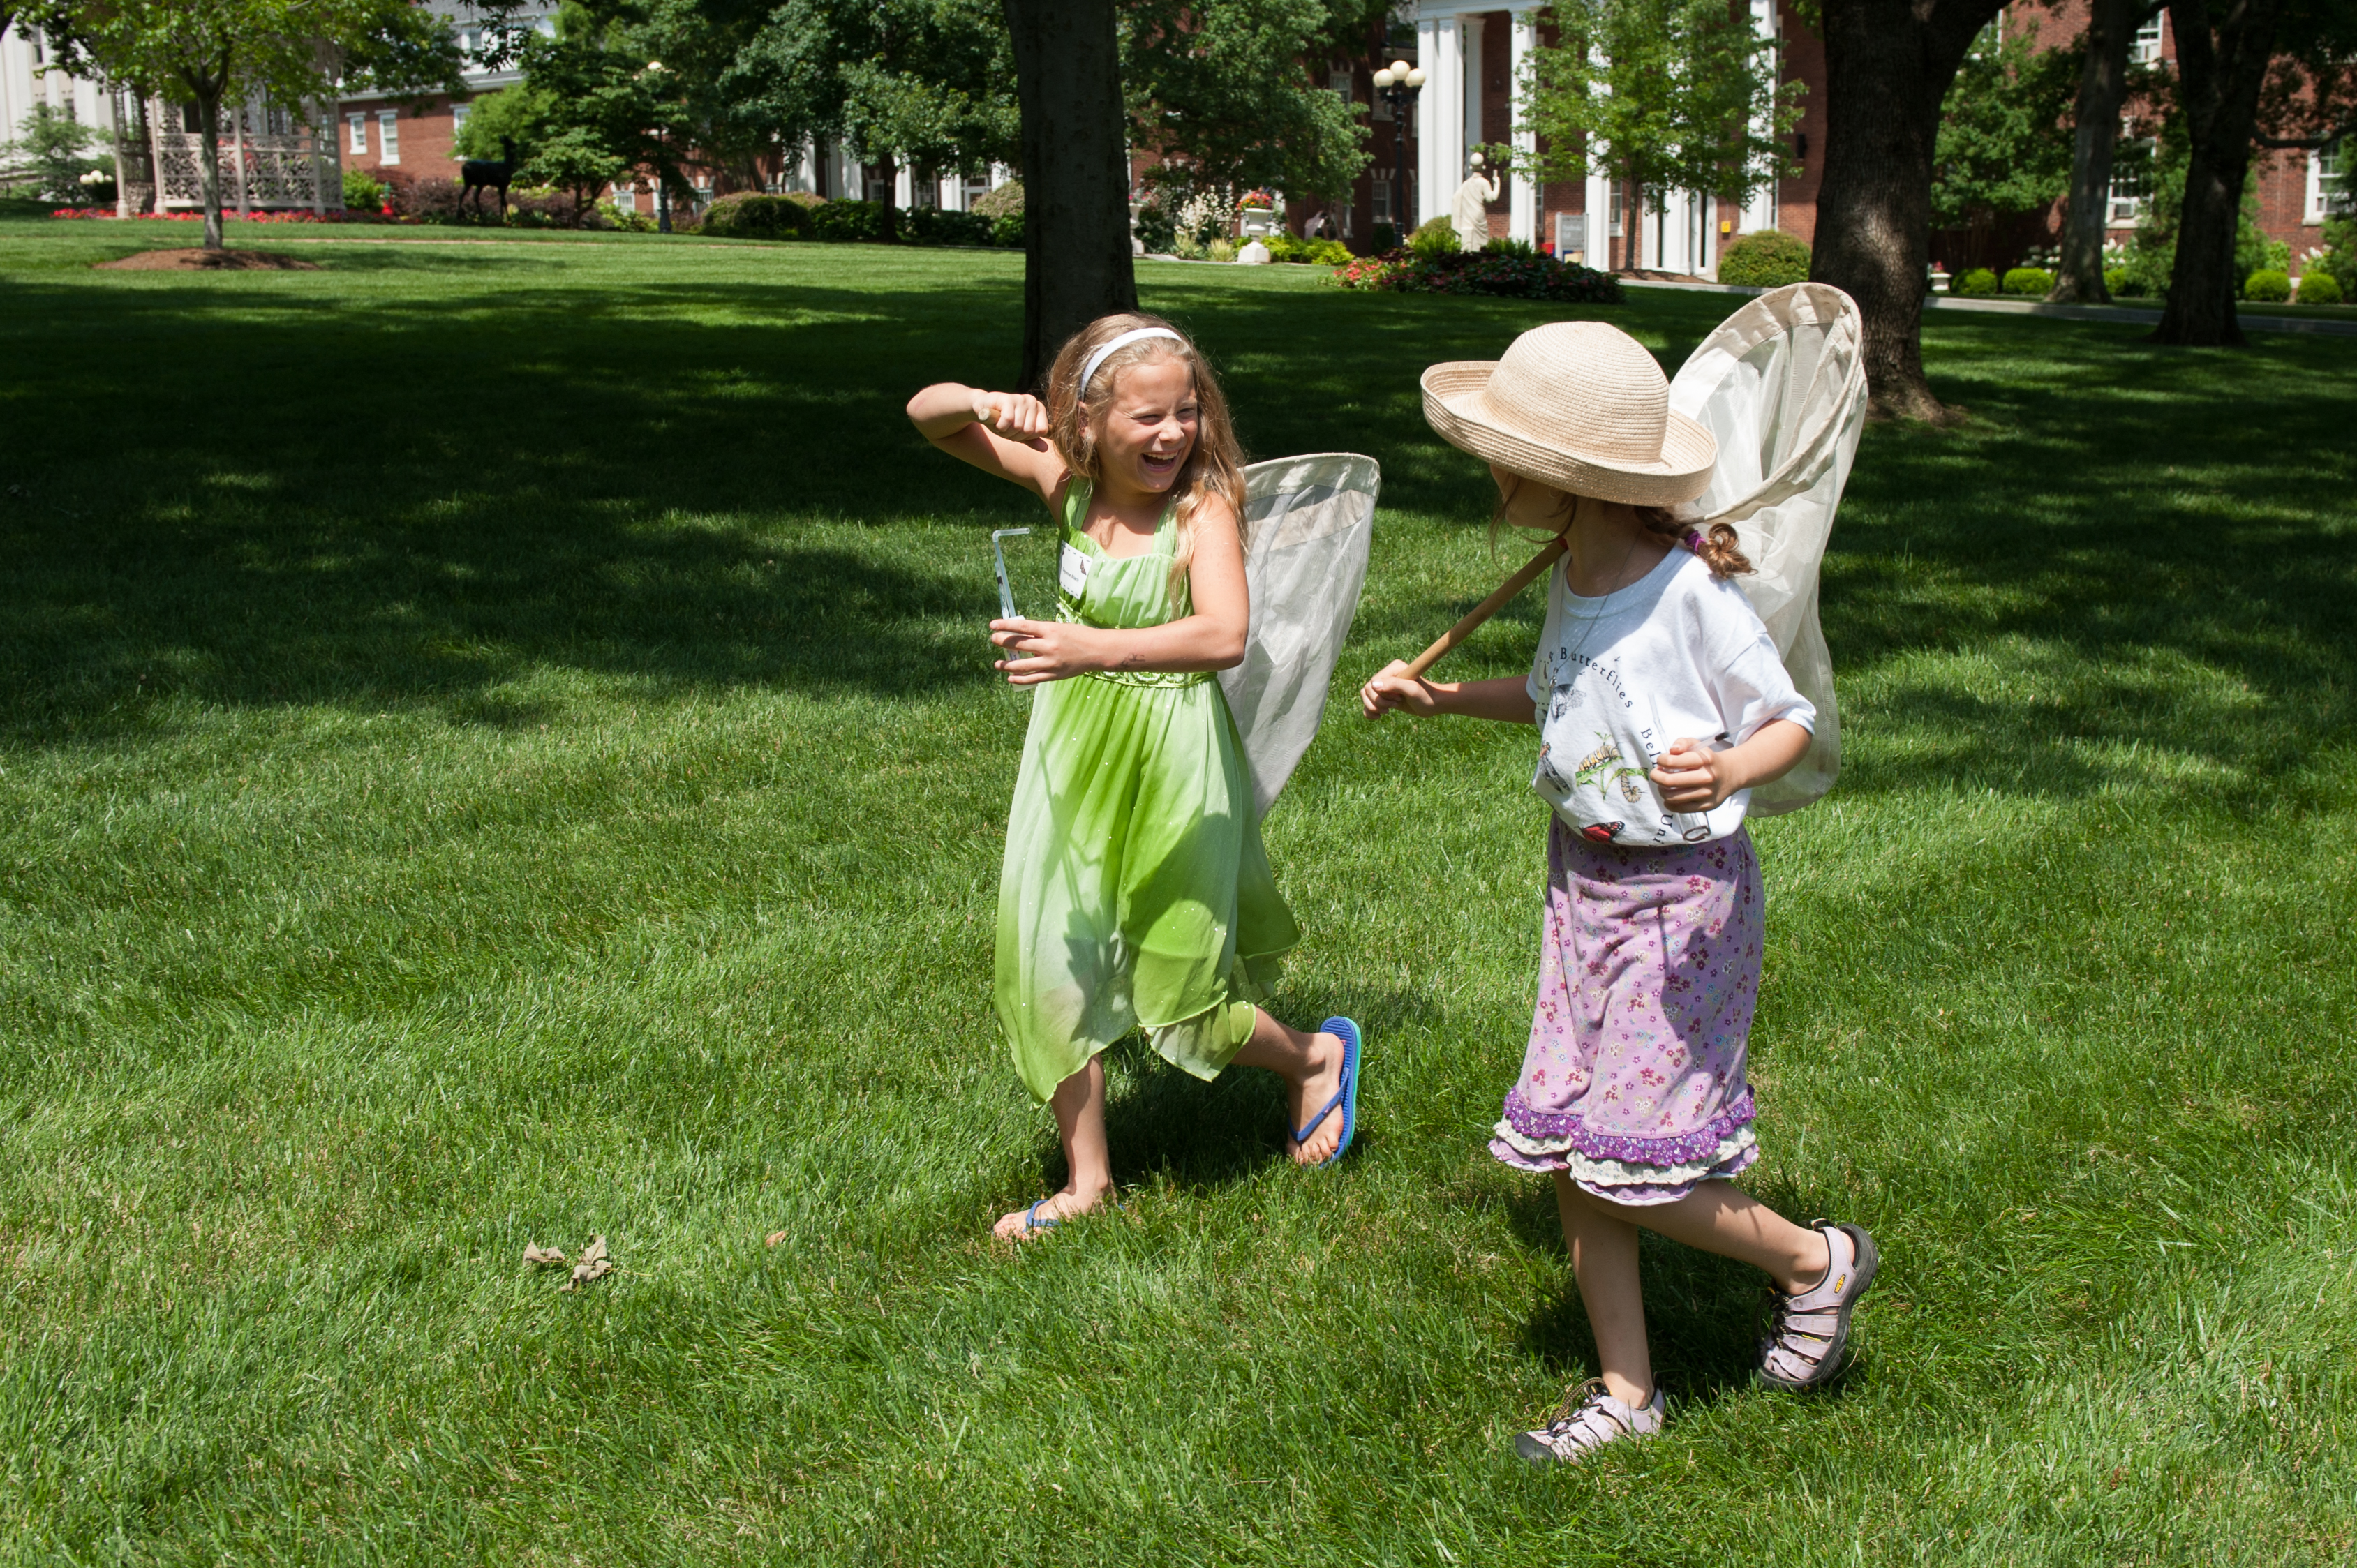 Two campers laugh as they walk with their bug nets